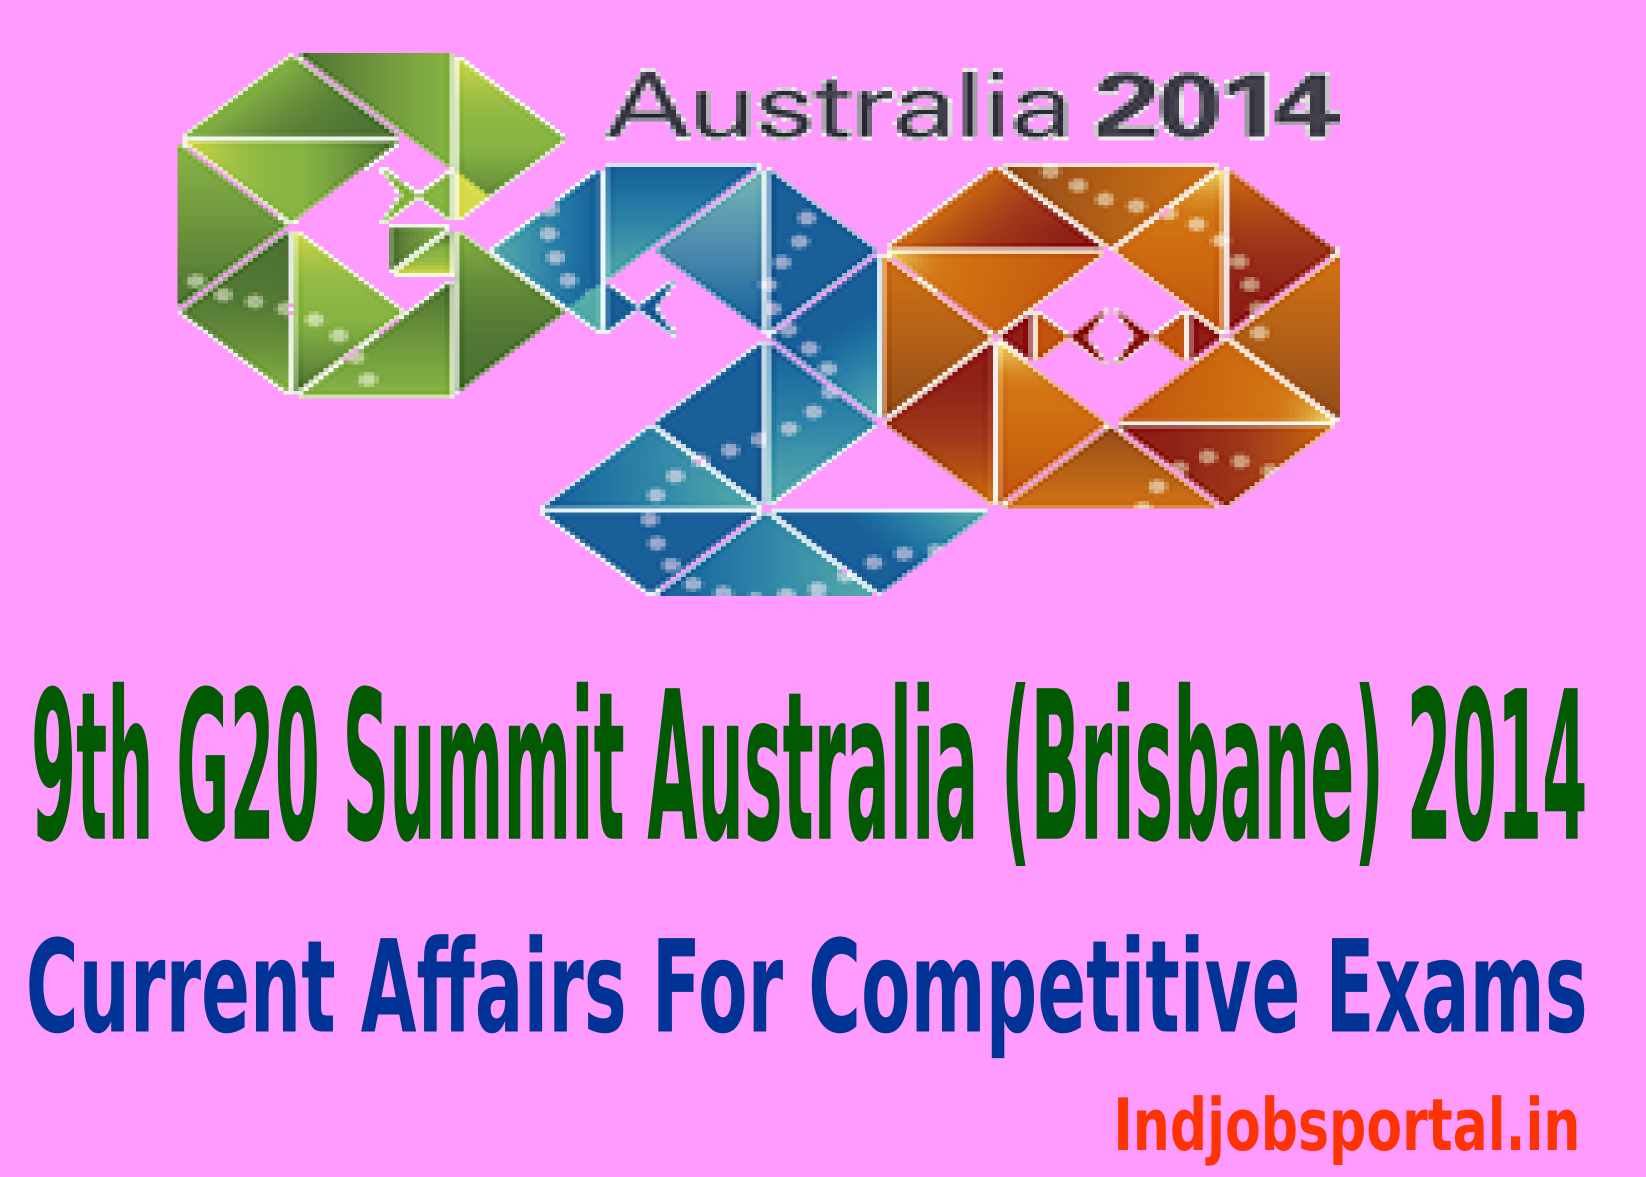 9th G20 Summit Australia (Brisbane) 2014: Current Affairs For Competitive Exams